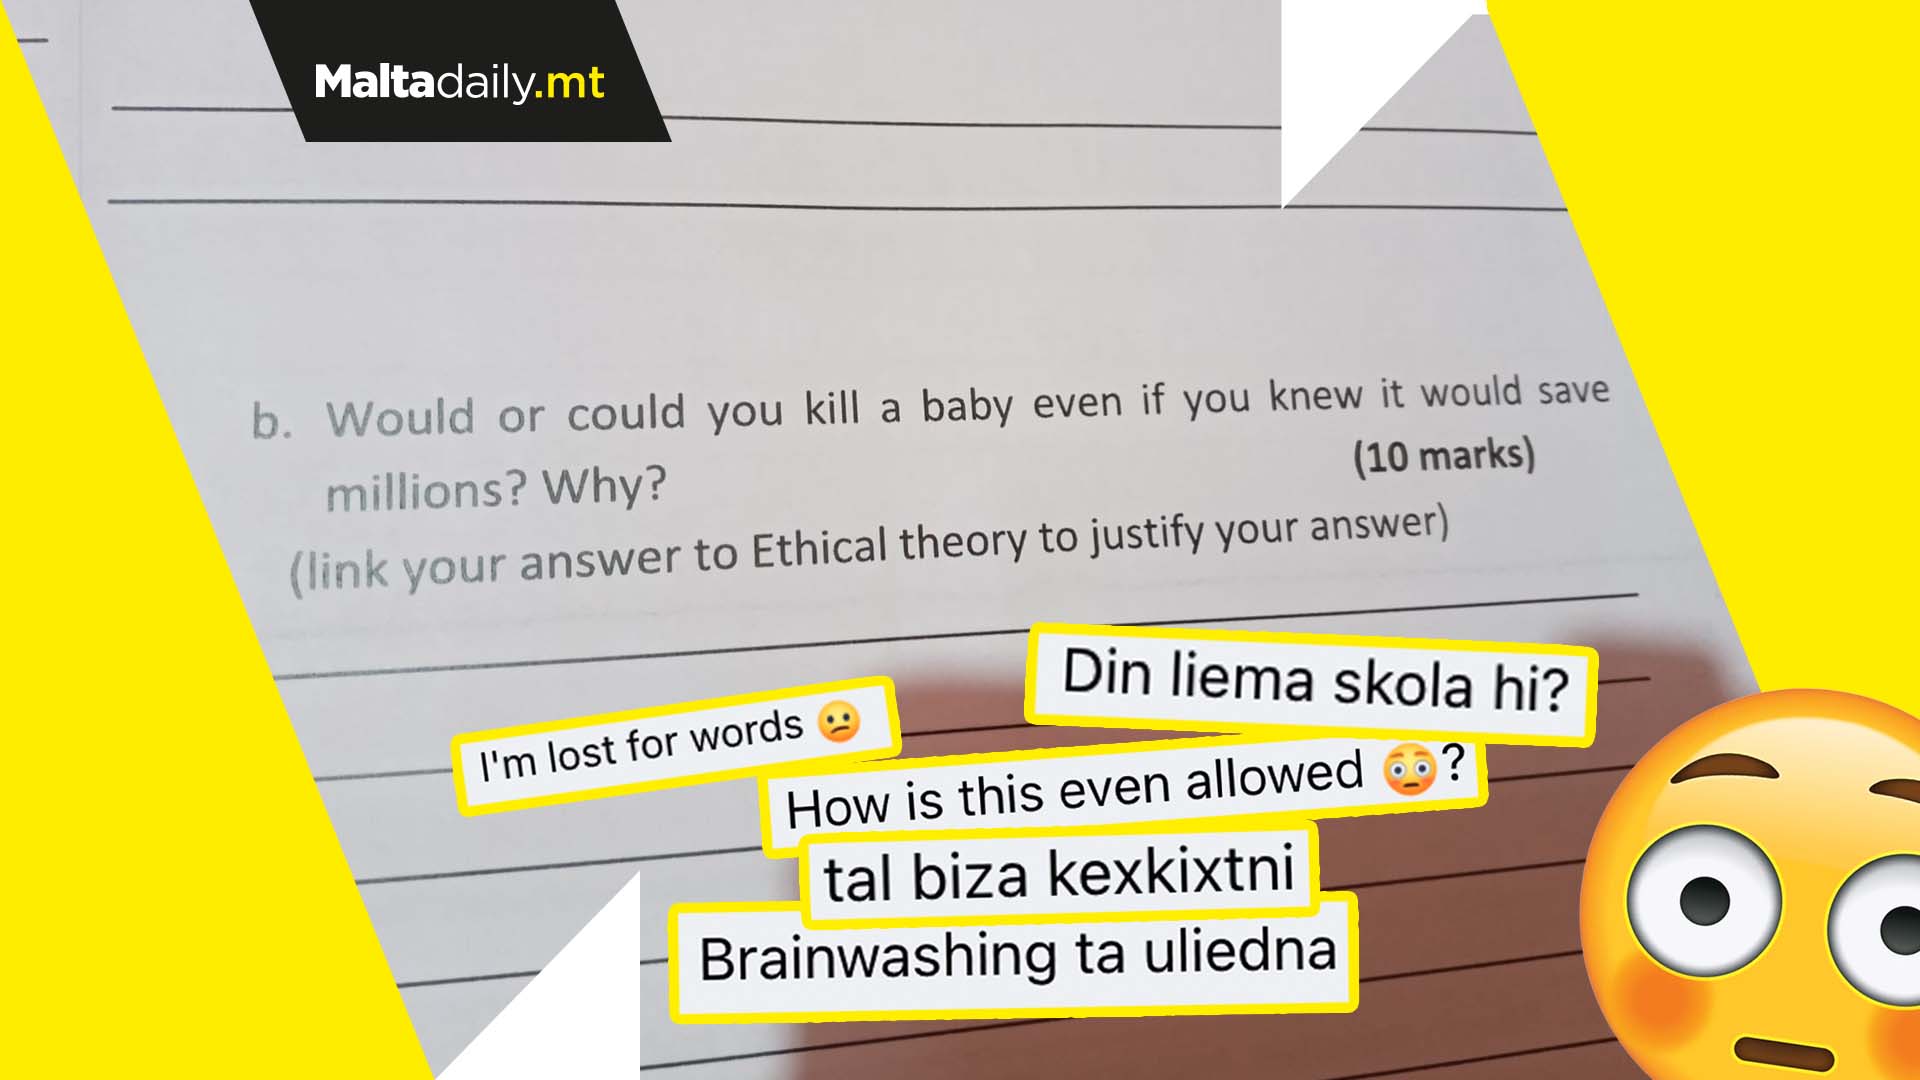 "Could you kill a baby...?" Parents shocked by controversial question on school handout